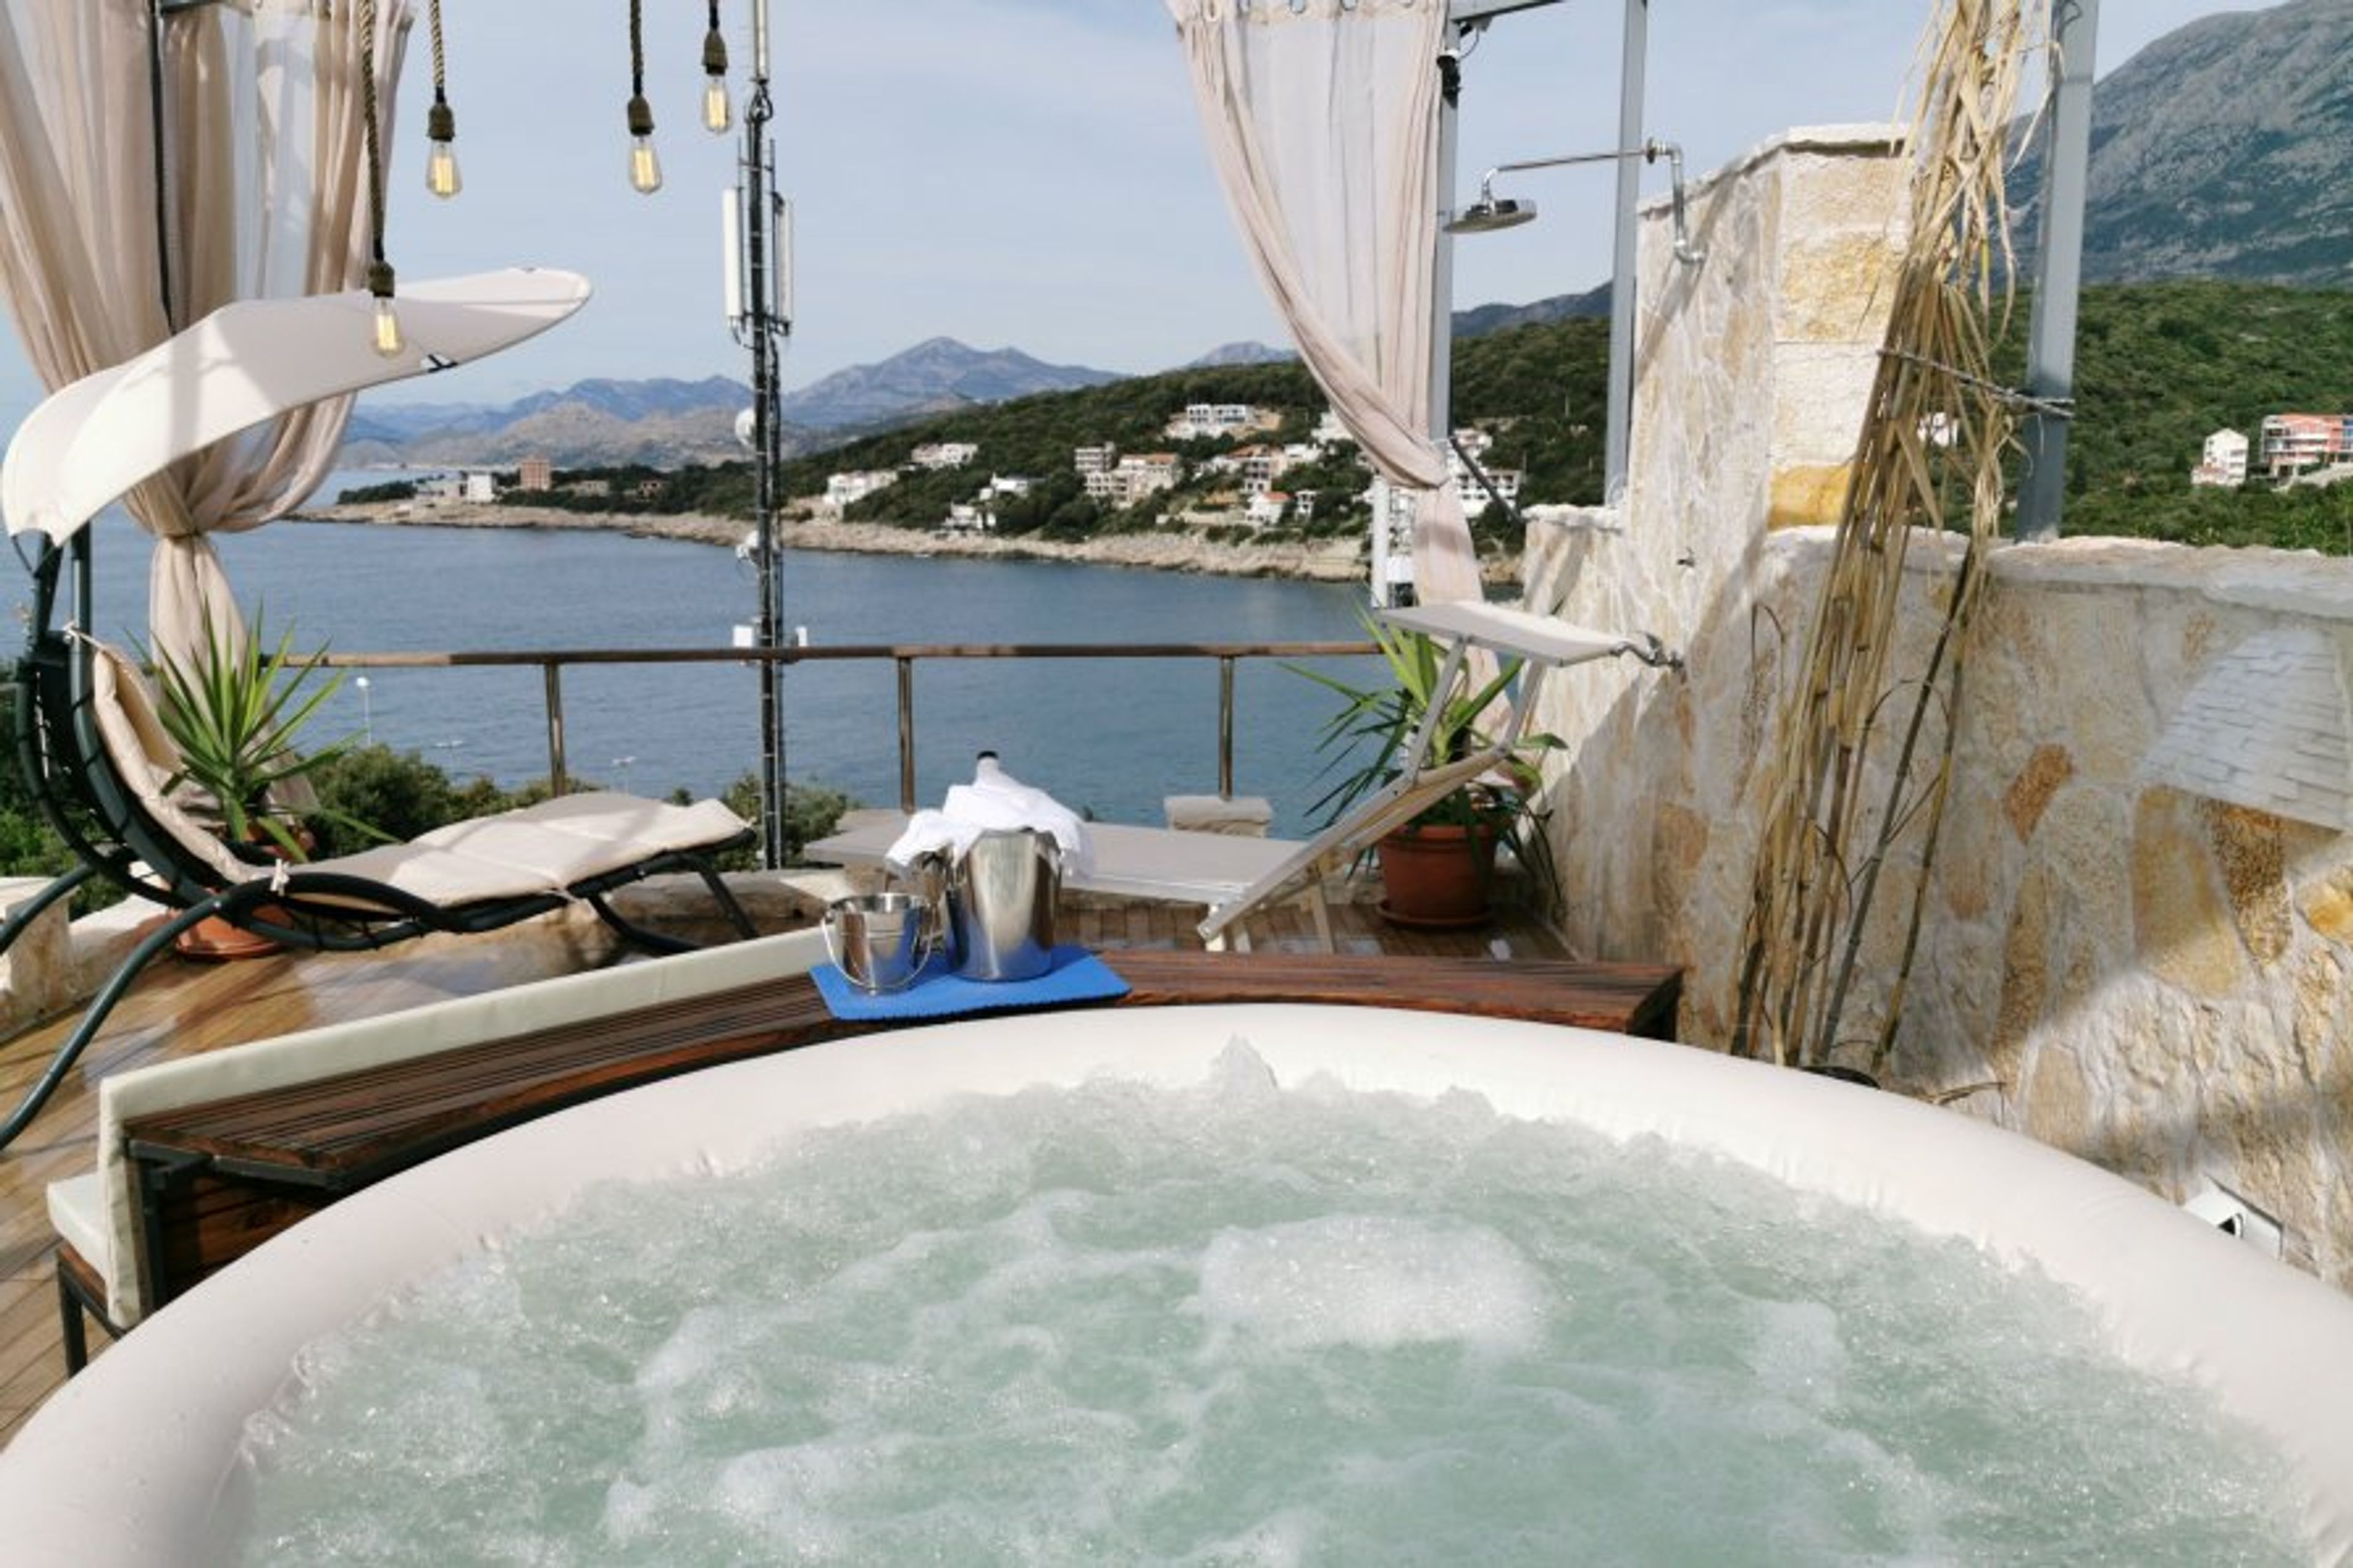 Jacuzzi and terrace with panorama view